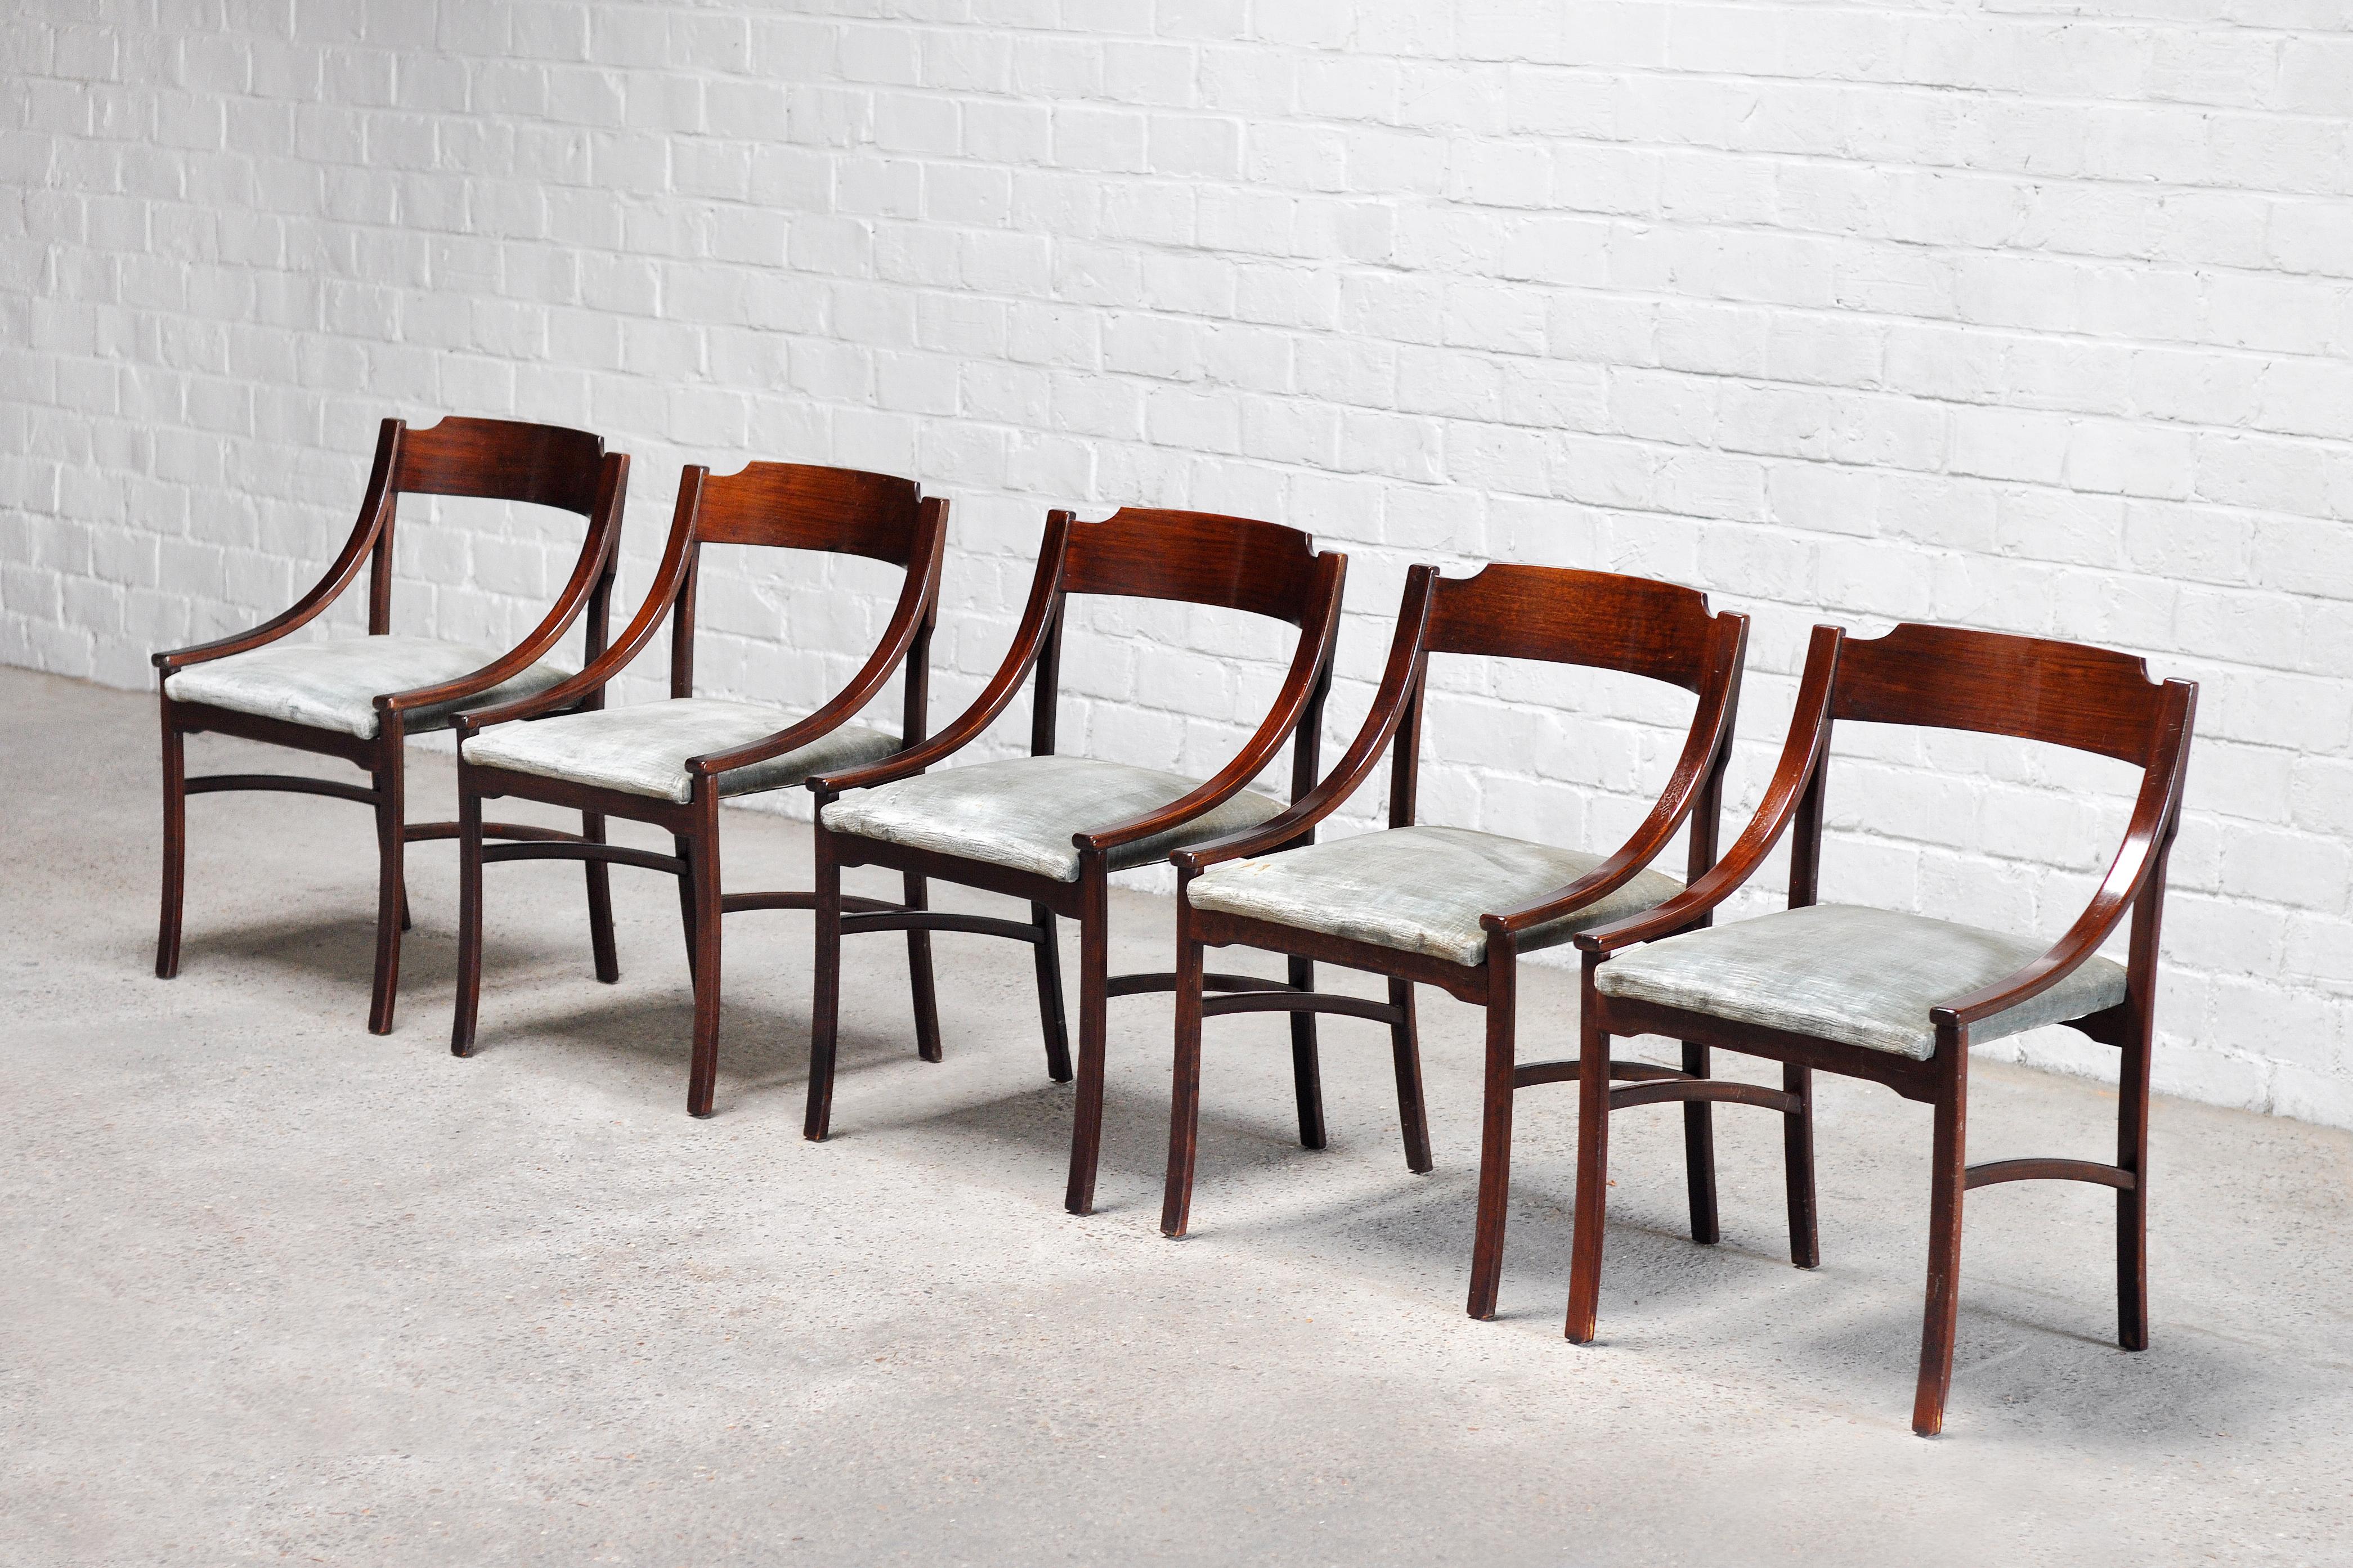 A set of 5 dining chairs designed and made in Italy in 1960’s. Attributed to Ico Parisi, these chairs are a variant of the '110' model.  They showcase a warm rosewood frame and backrest with distinct architectural lines and forms. The original